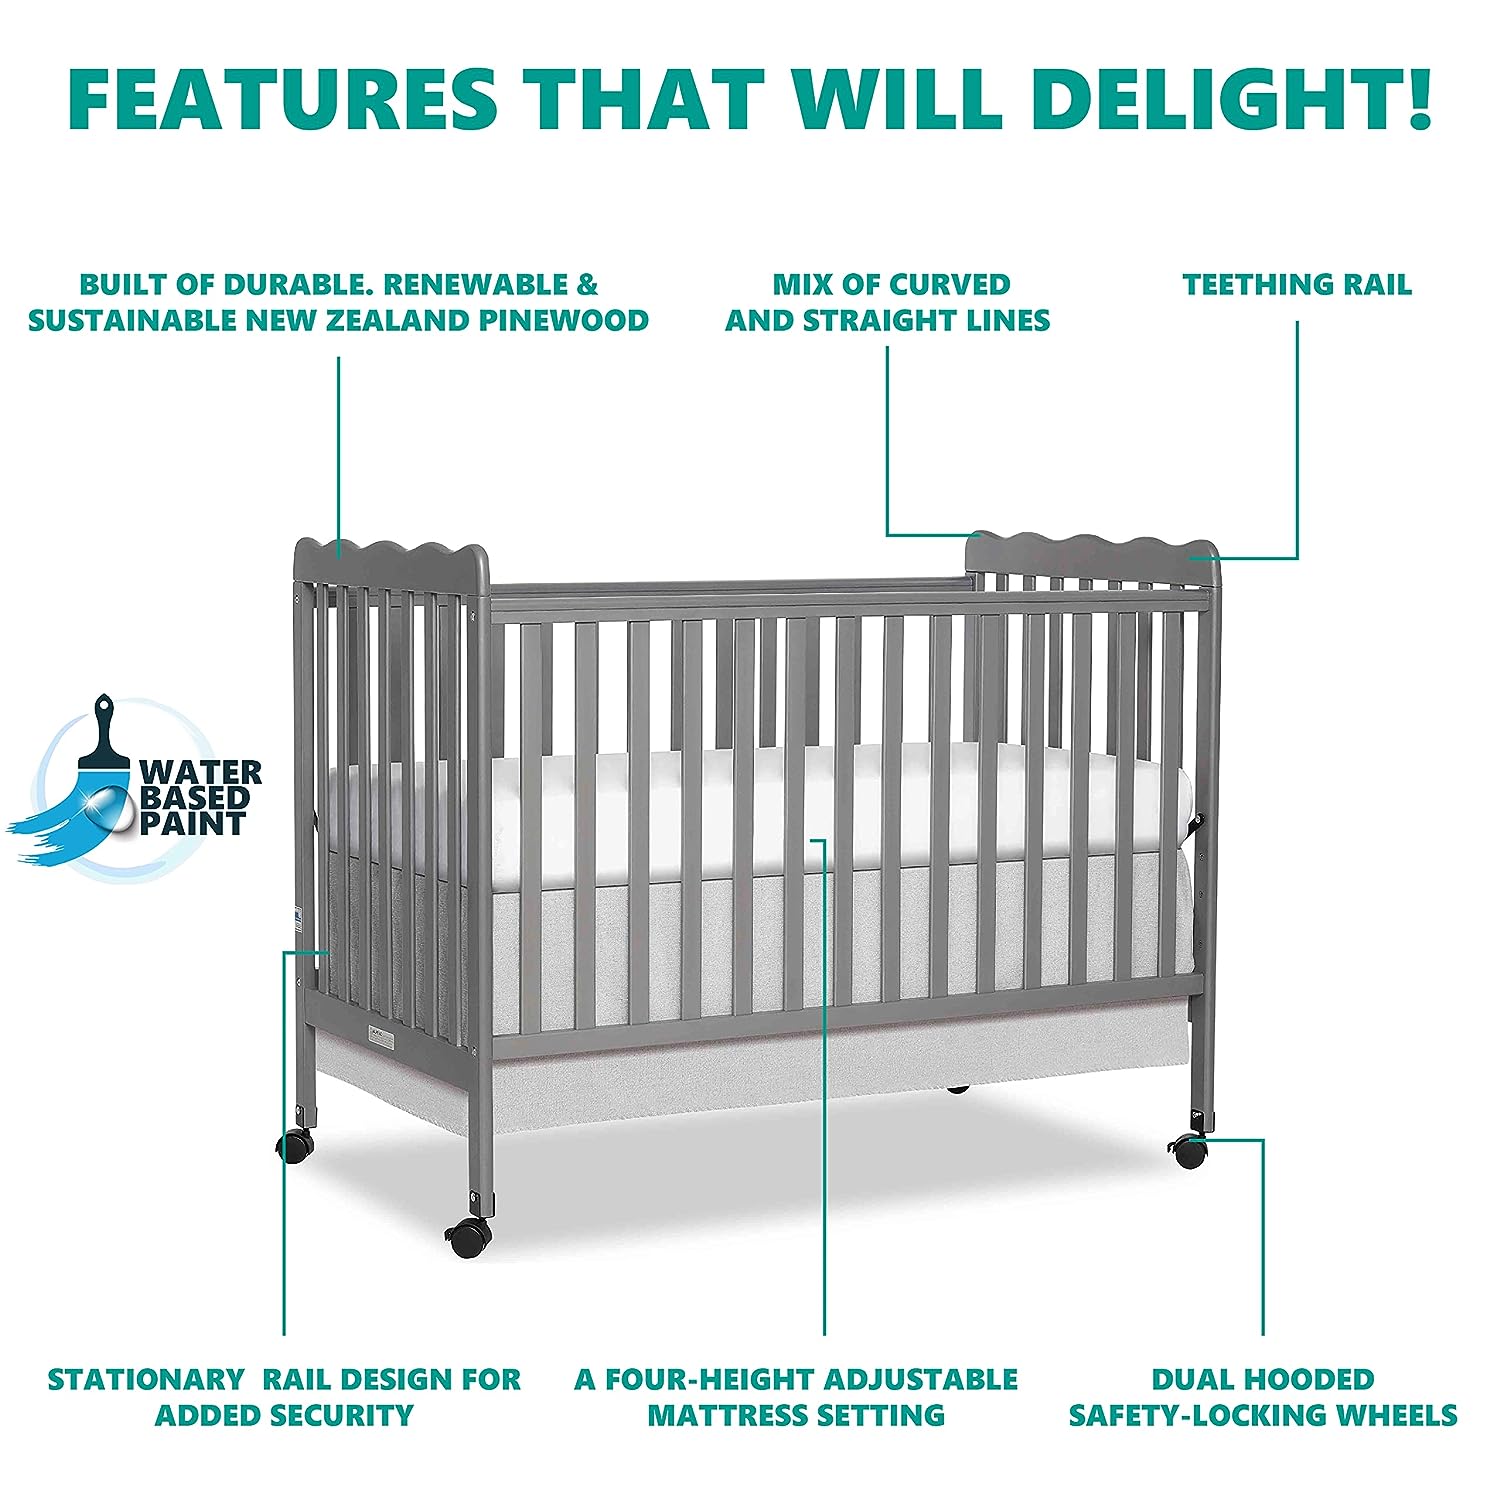 Dream On Me Carson Classic 3-in-1 Convertible Crib in Steel Grey - $80